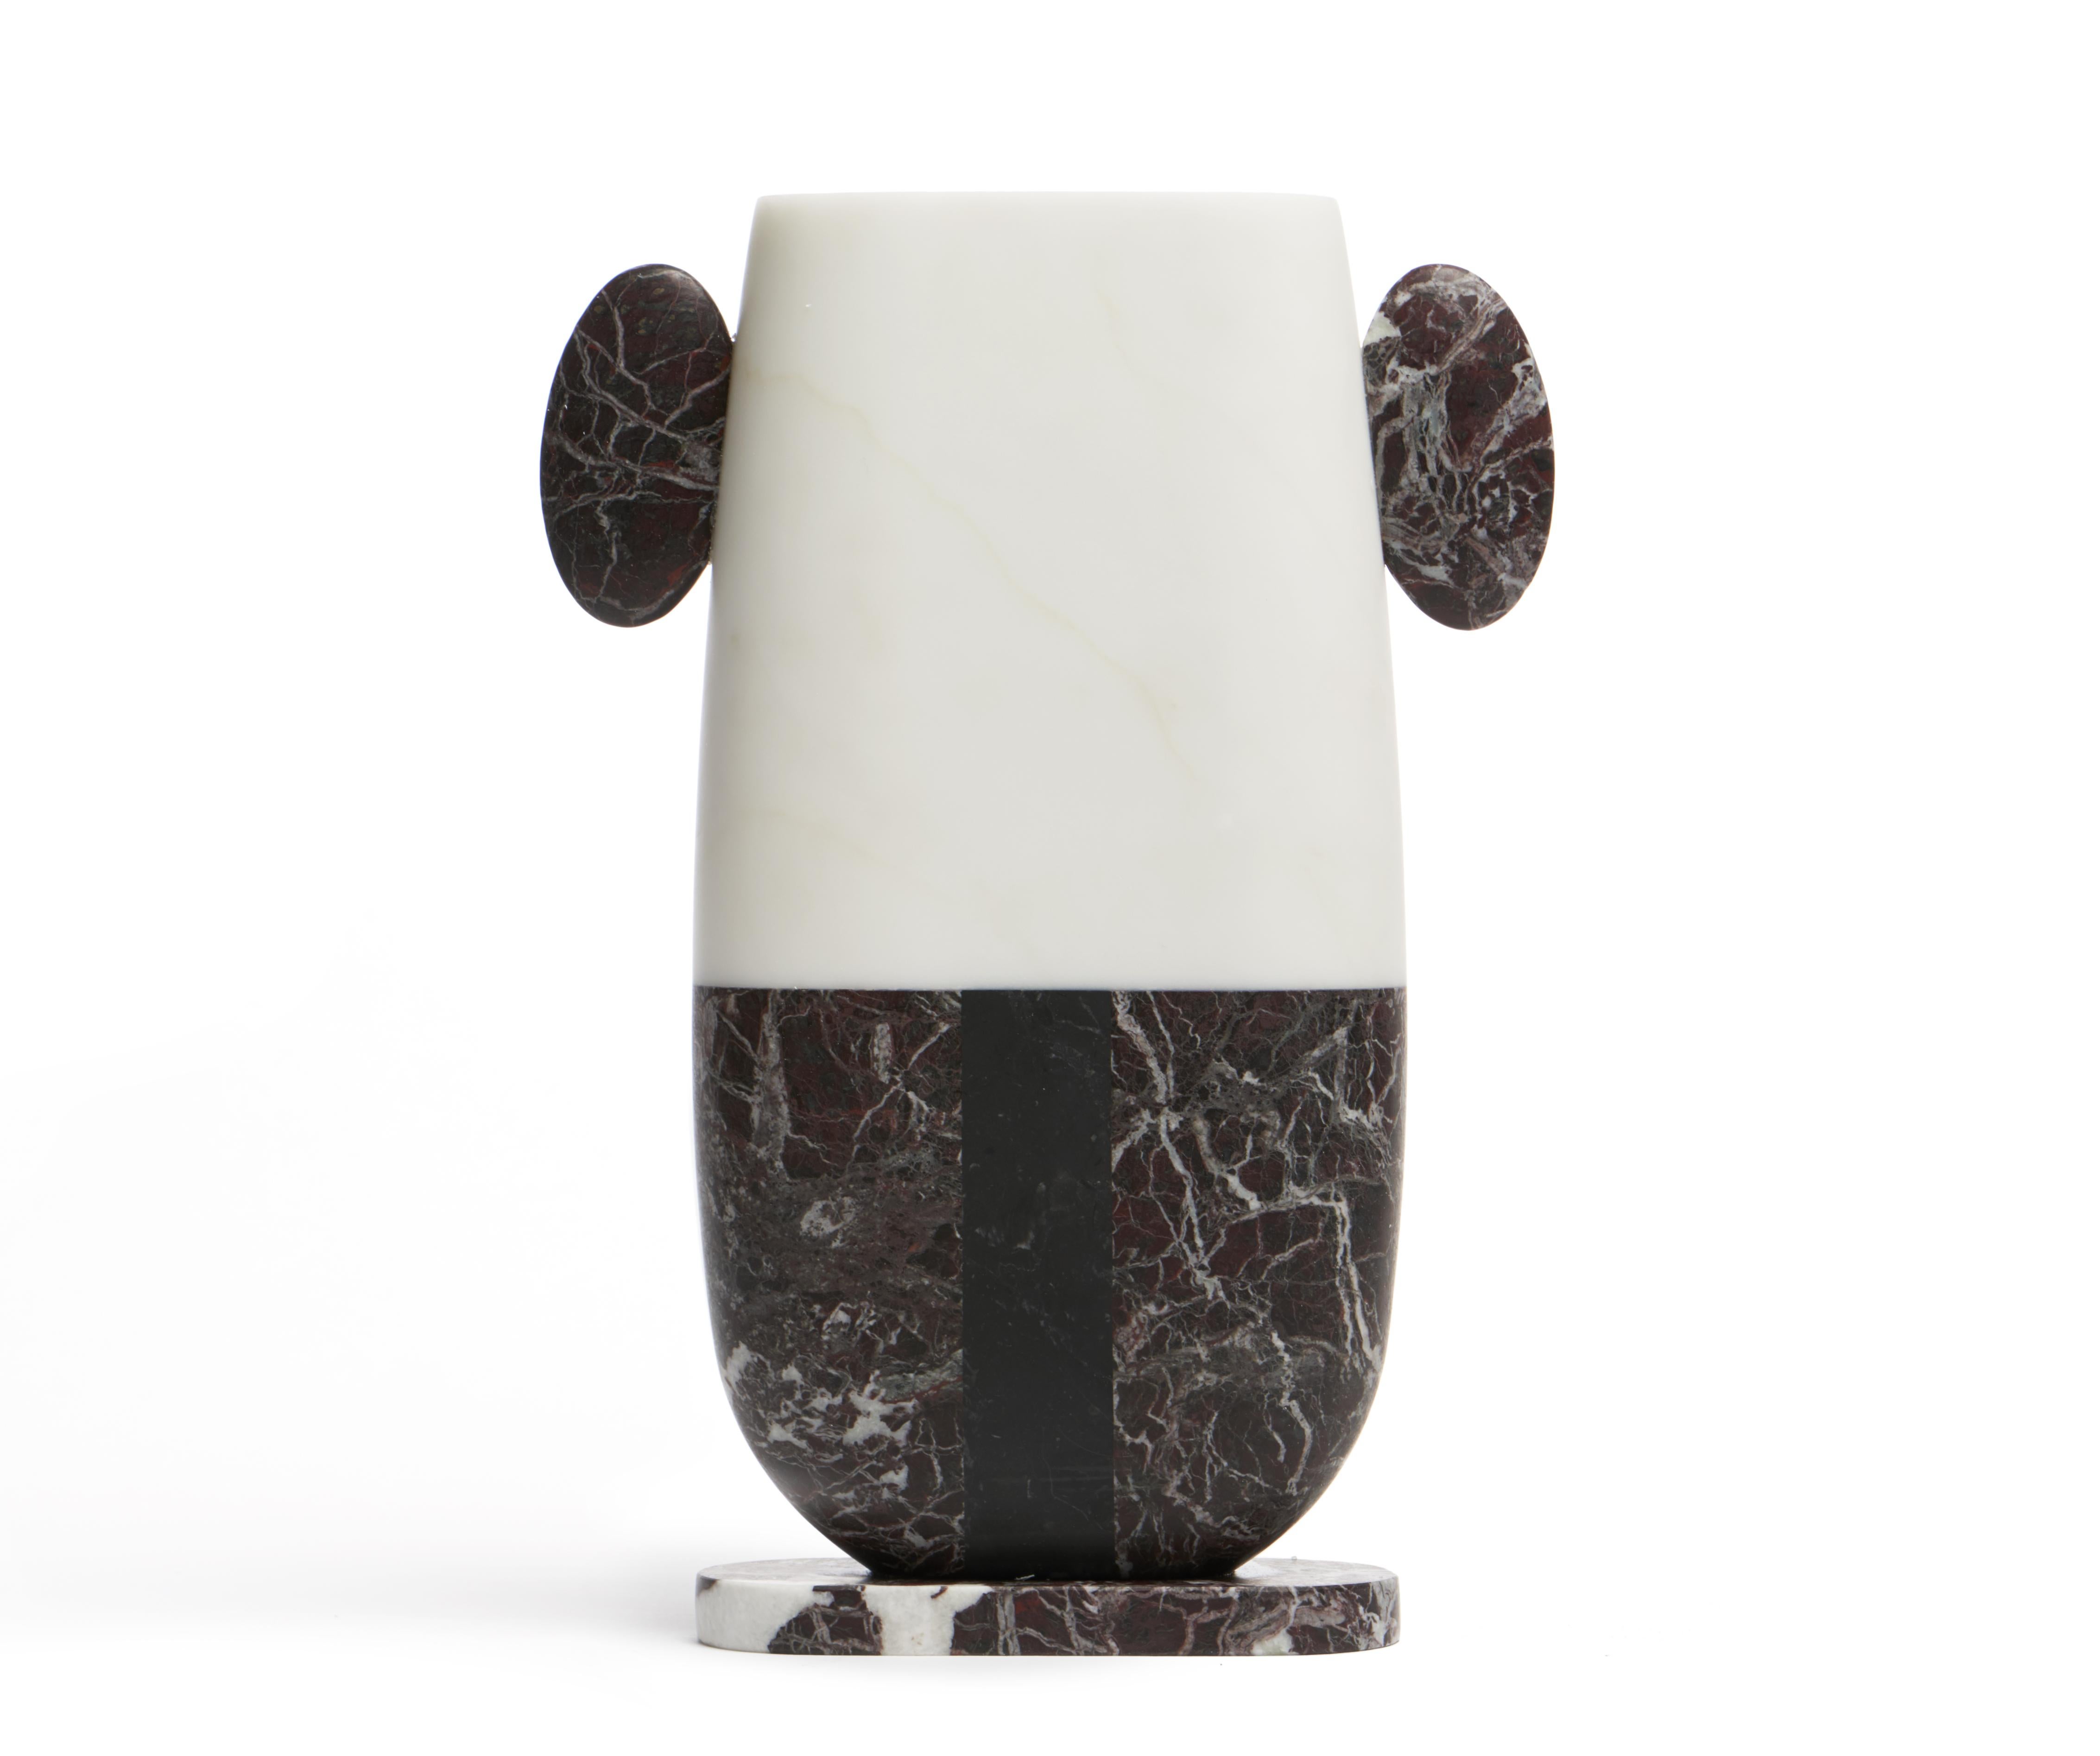 Pietro marble vase by Matteo Cibic
Dimensions: 10.7 x 2.9 x 15.1 cm
Materials:
Bianco
Michelangelo,
Rosso Levanto

Vases made of various marbles cannot guarantee watertightness, better not use for cut flowers unless with the use vials for